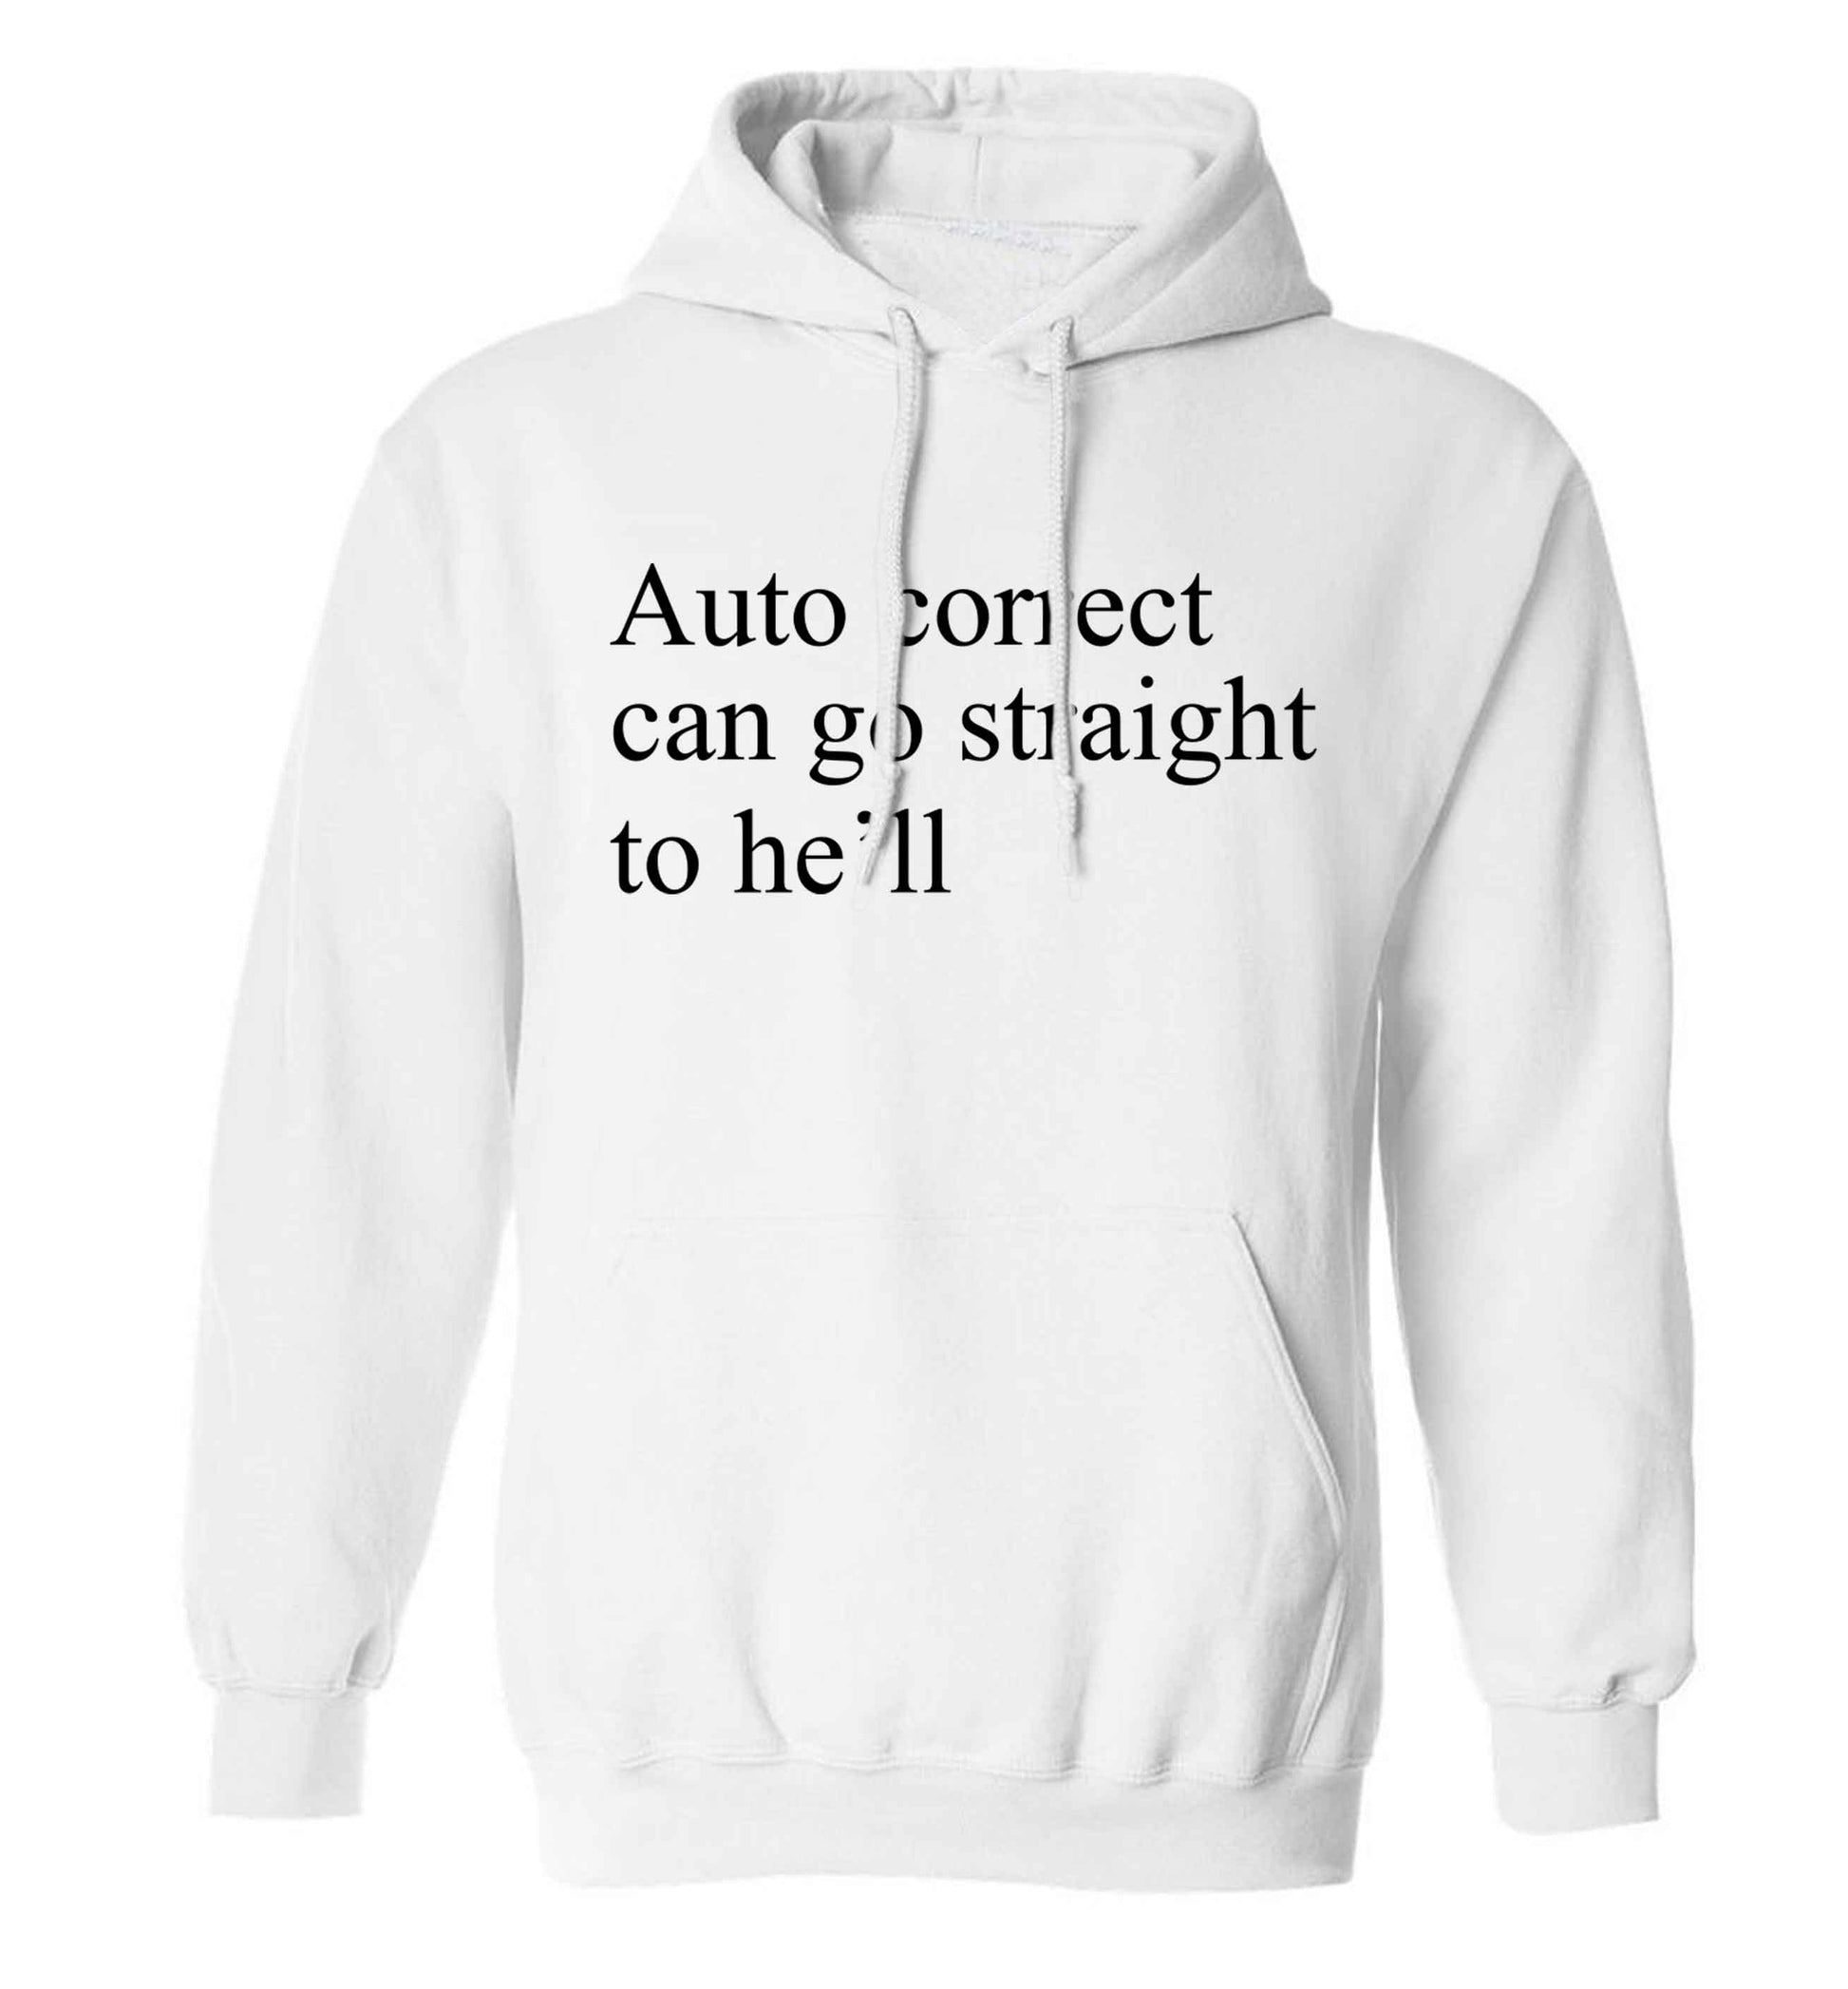 Auto correct can go straight to he'll adults unisex white hoodie 2XL